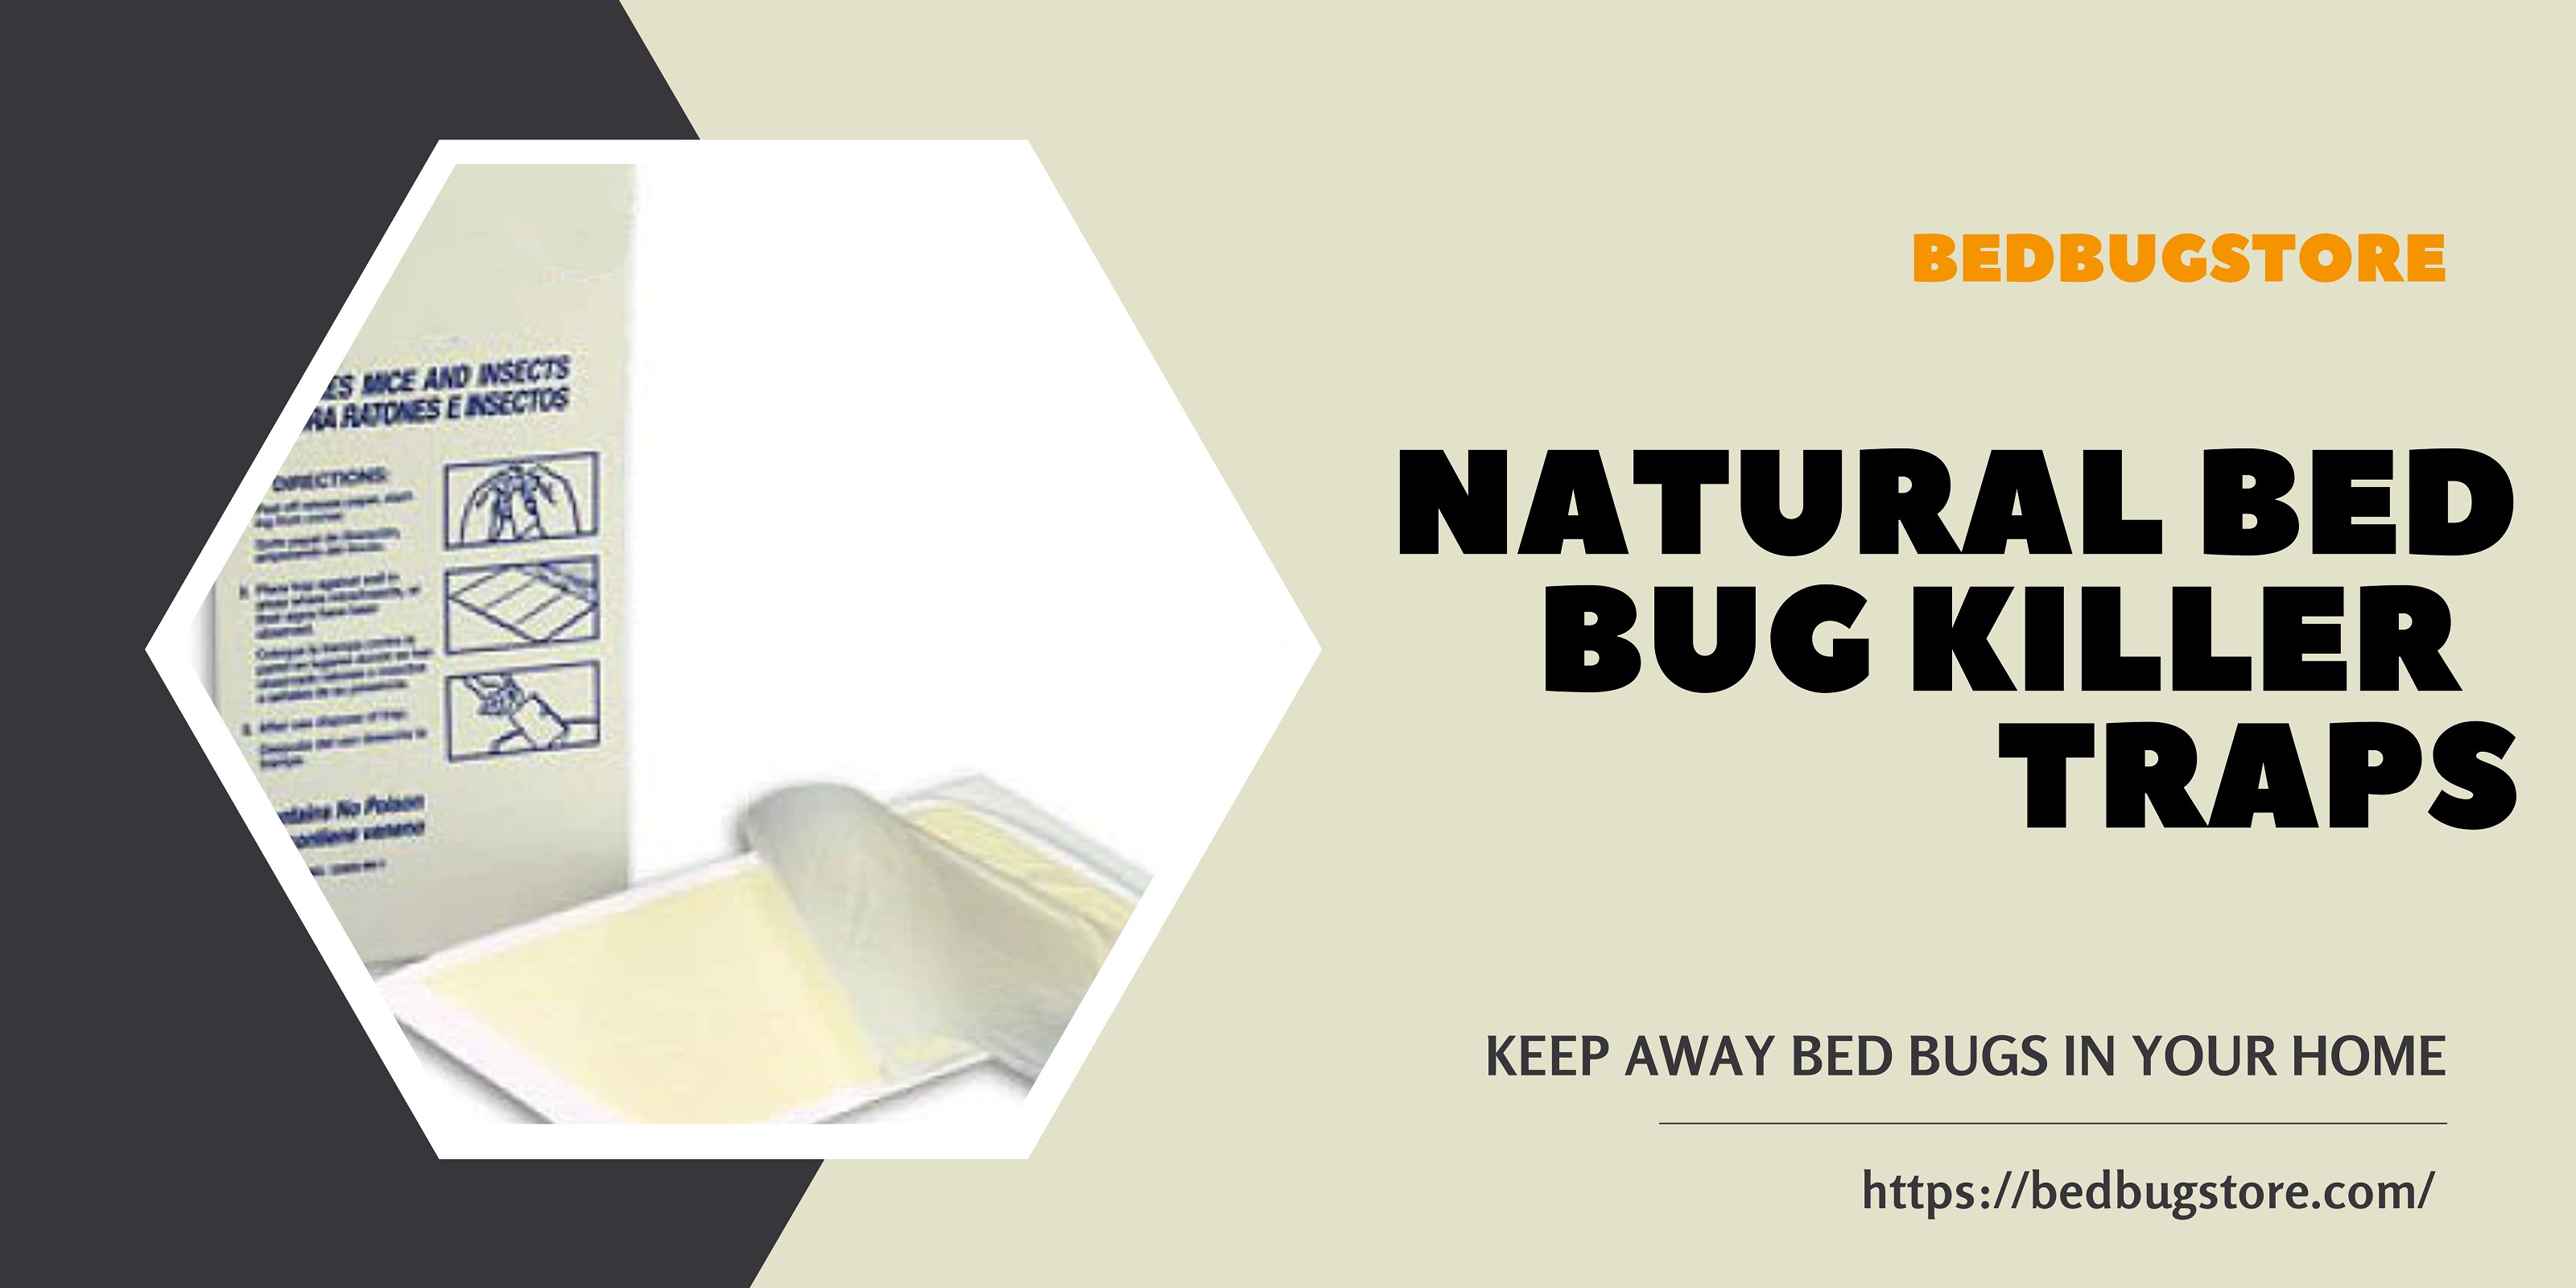 Eliminate Bed Bugs with Natural Bed Bug Killer Traps - Pack of 8